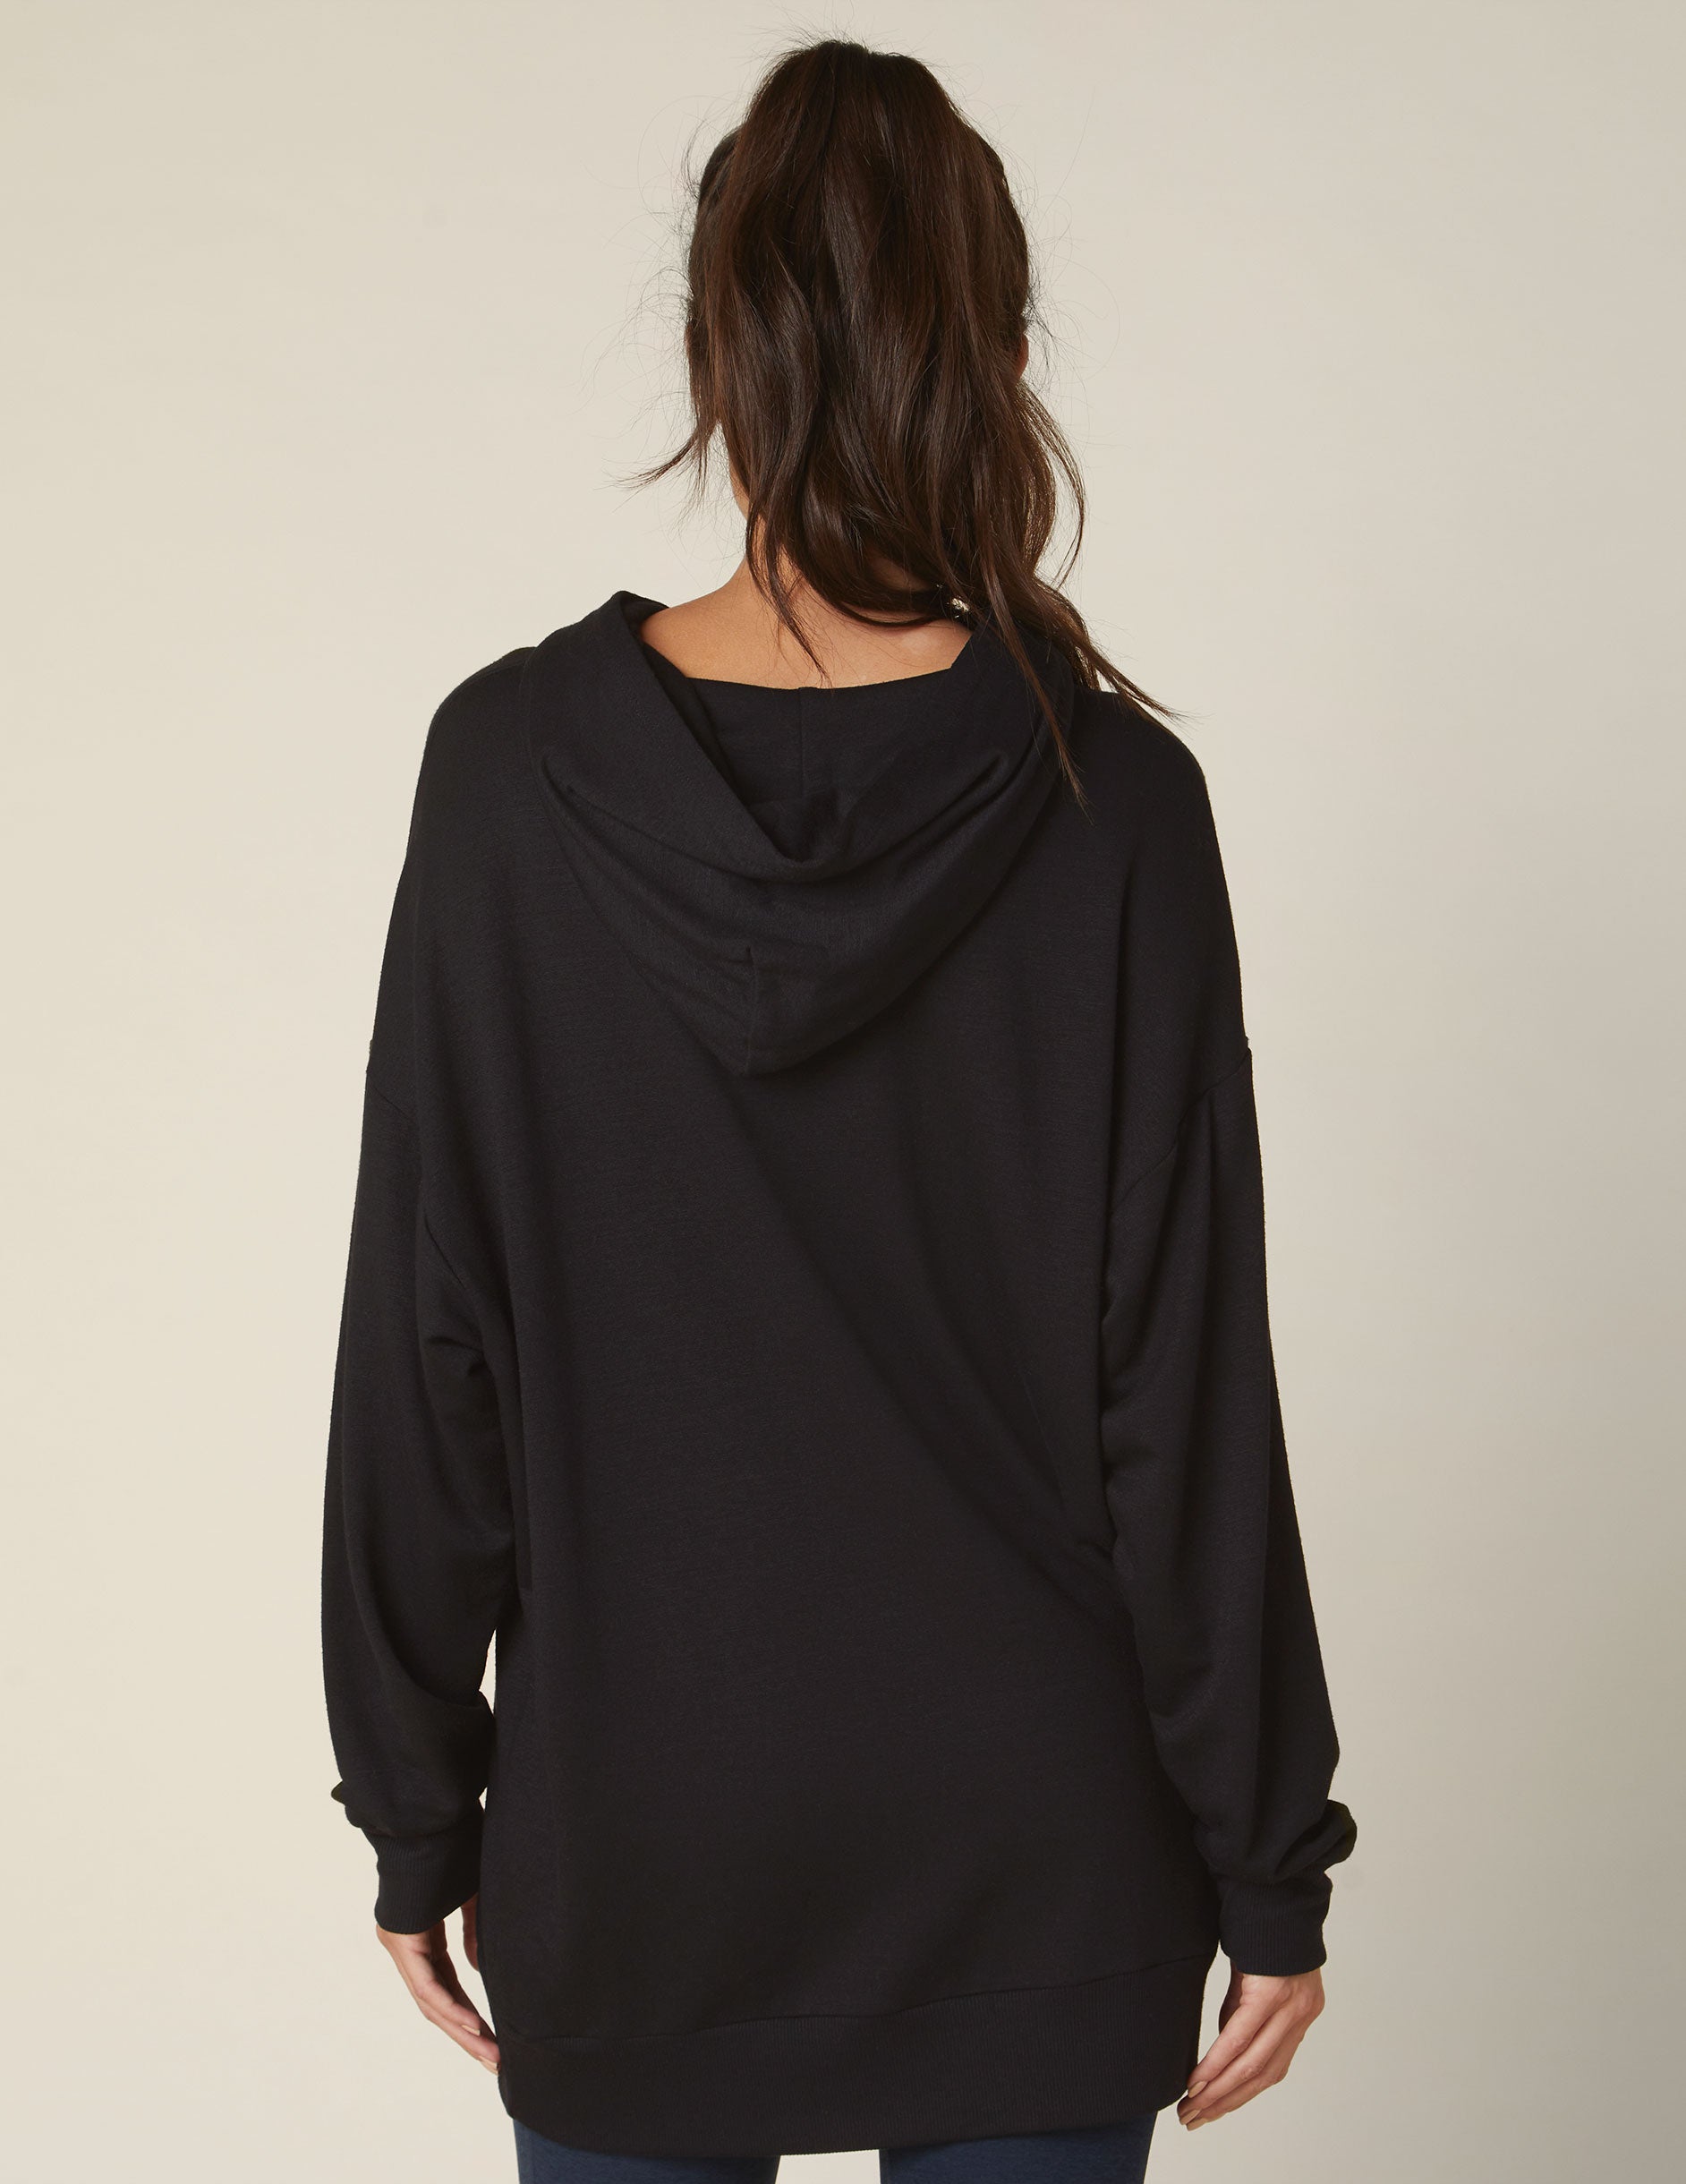 black oversized fit hoodie with a kangaroo pocket. 